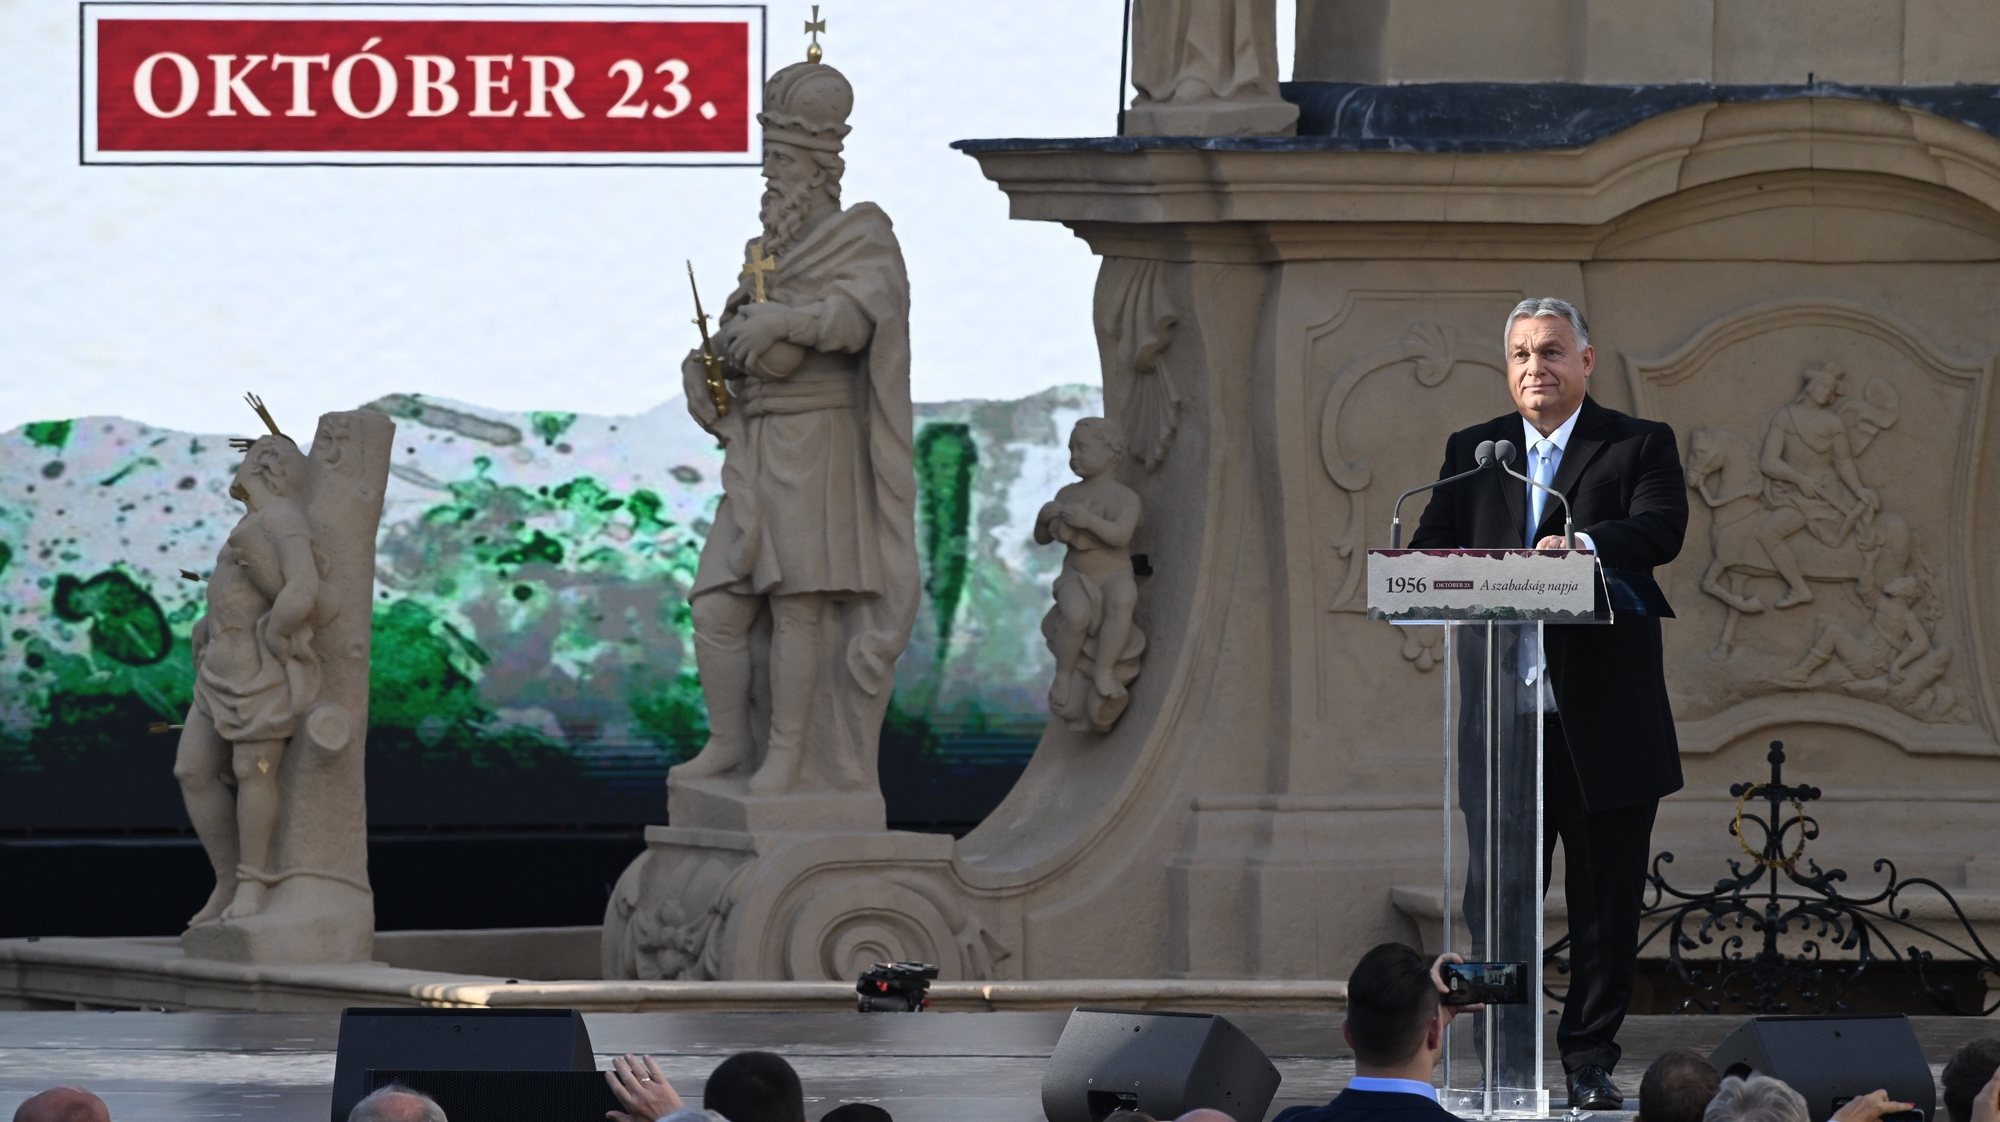 epa10934606 Hungarian Prime Minister Viktor Orban delivers his speech to mark the 67th anniversary of the Hungarian revolution and war of independence against communist rule and the Soviet Union in 1956 in Veszprem, Hungary, 23 October 2023. The national holiday marks the 67th anniversary of the outbreak of the Hungarian revolution and war of independence against communist rule and the Soviet Union on 23 October 1956.  EPA/Szilard Koszticsak HUNGARY OUT